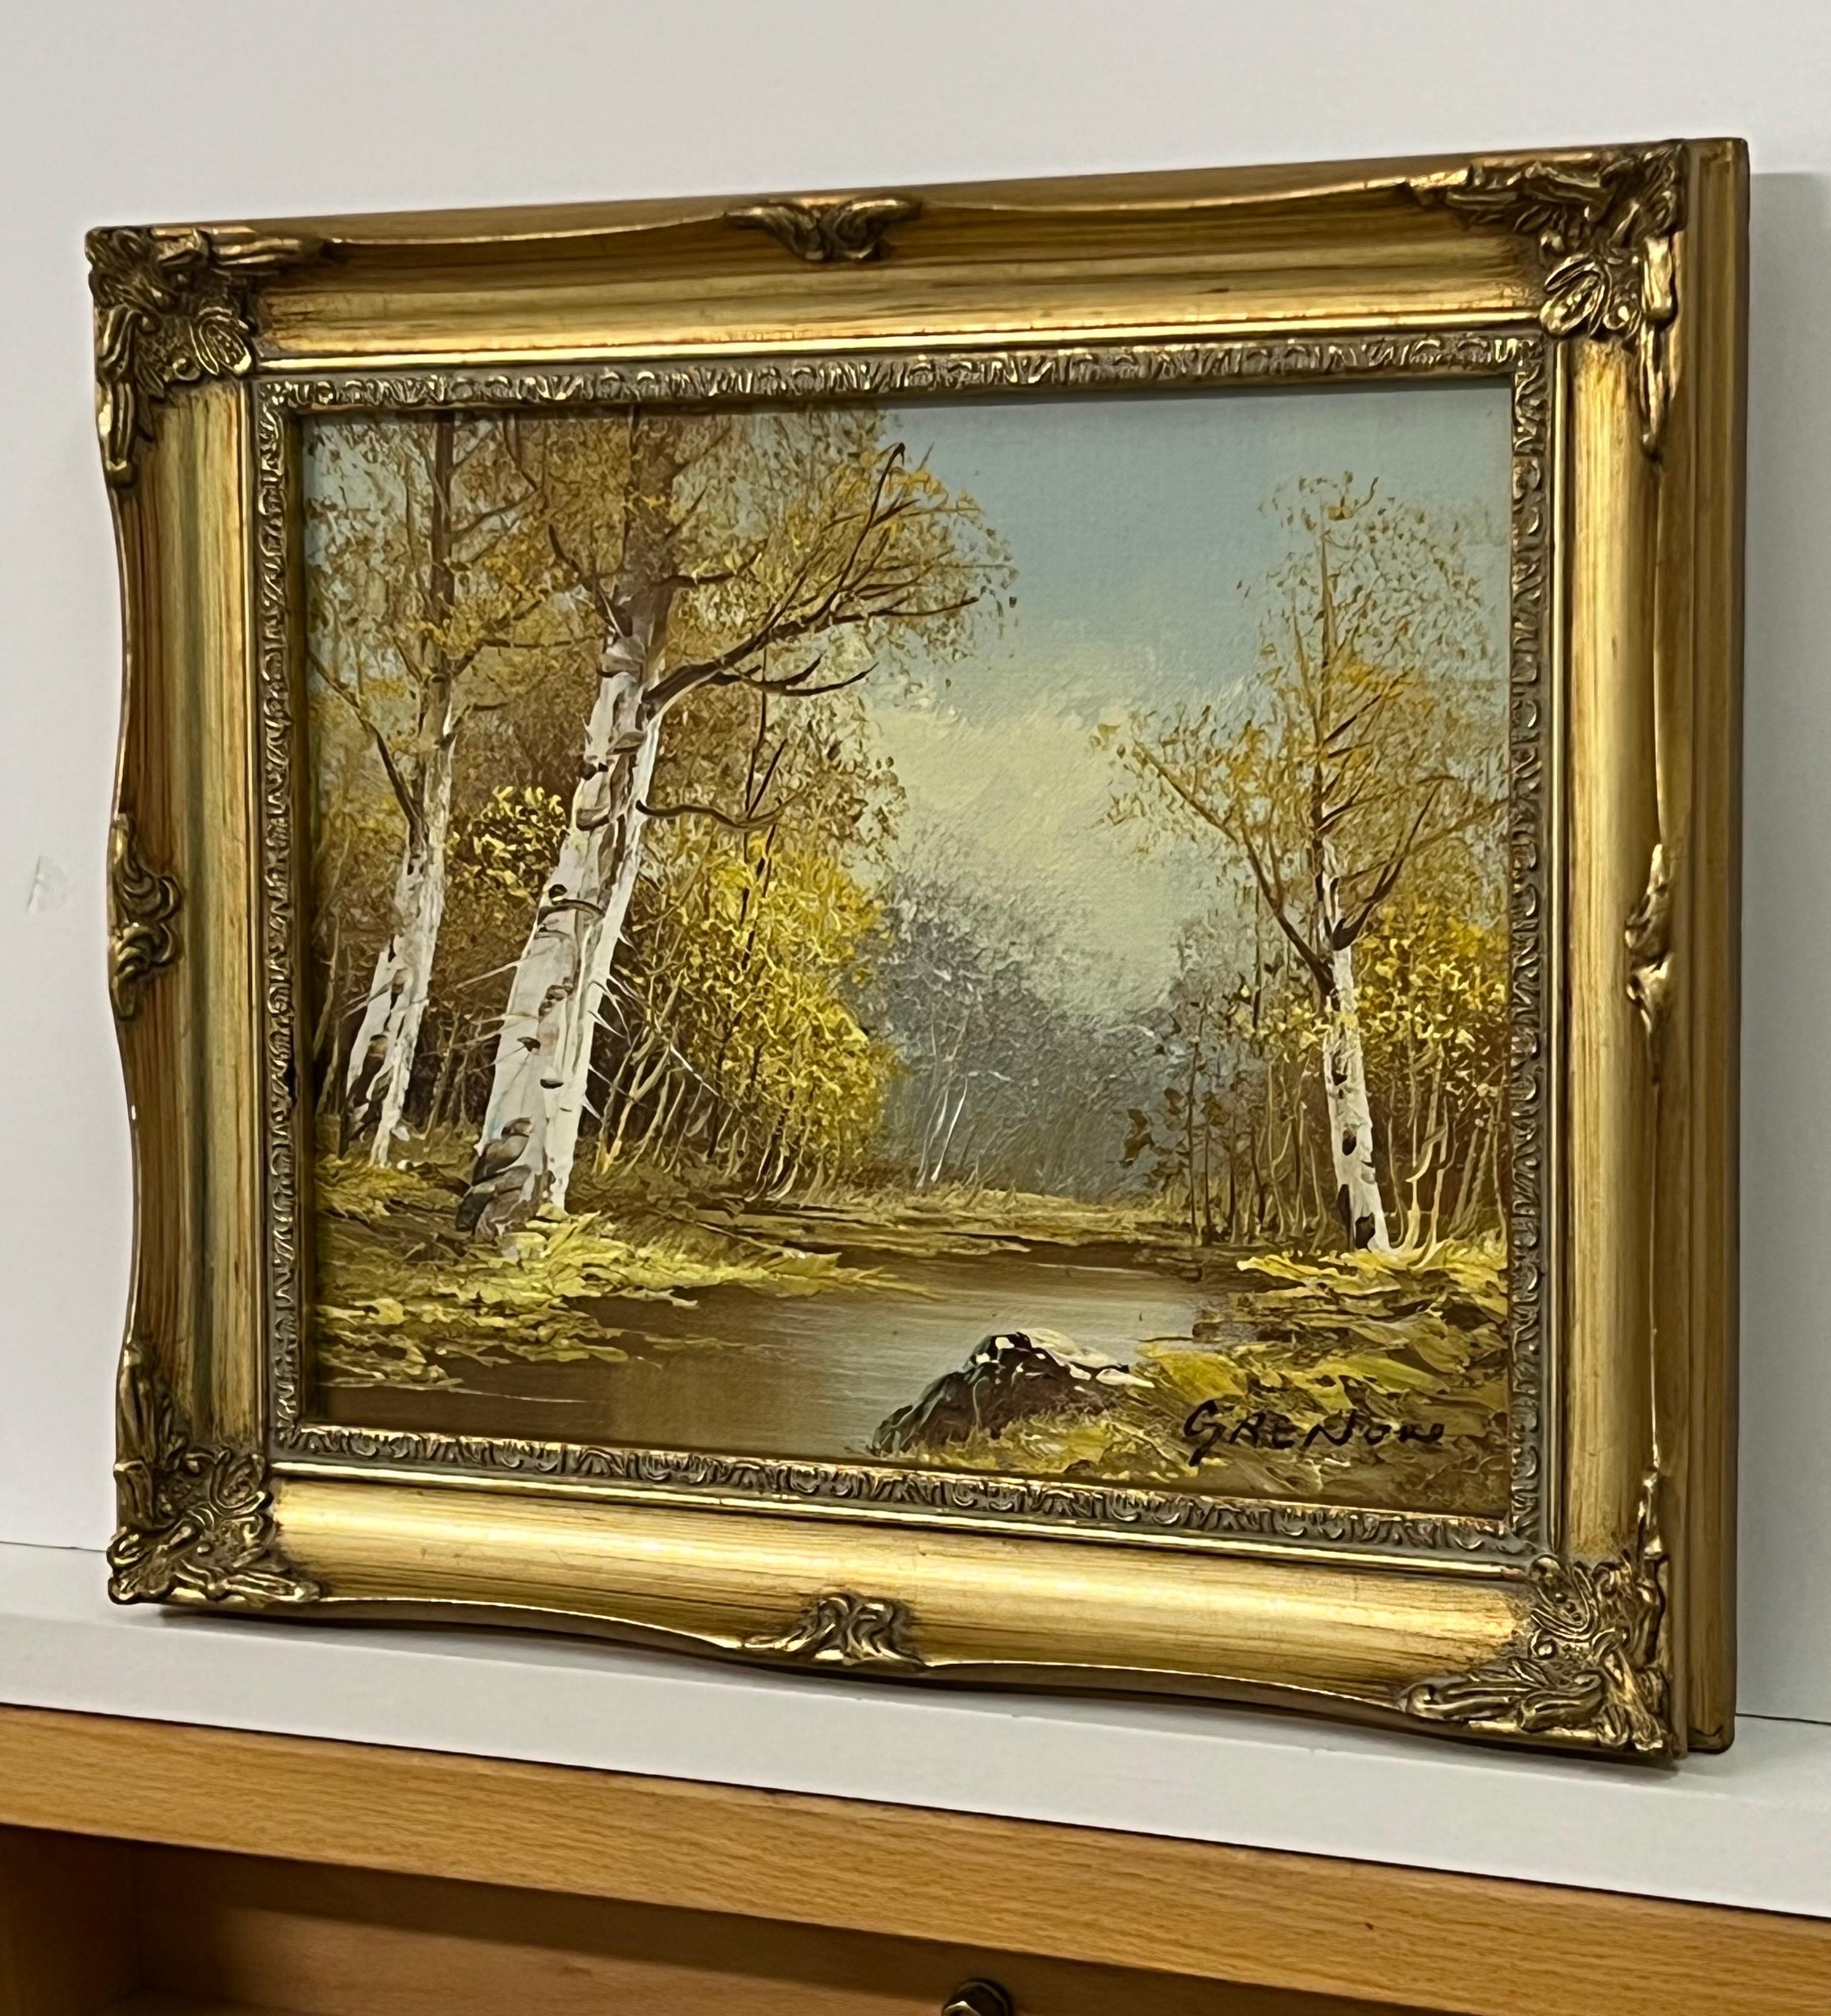 Vintage 20th Century Oil Painting of a River Landscape with Silver Birch Trees For Sale 1